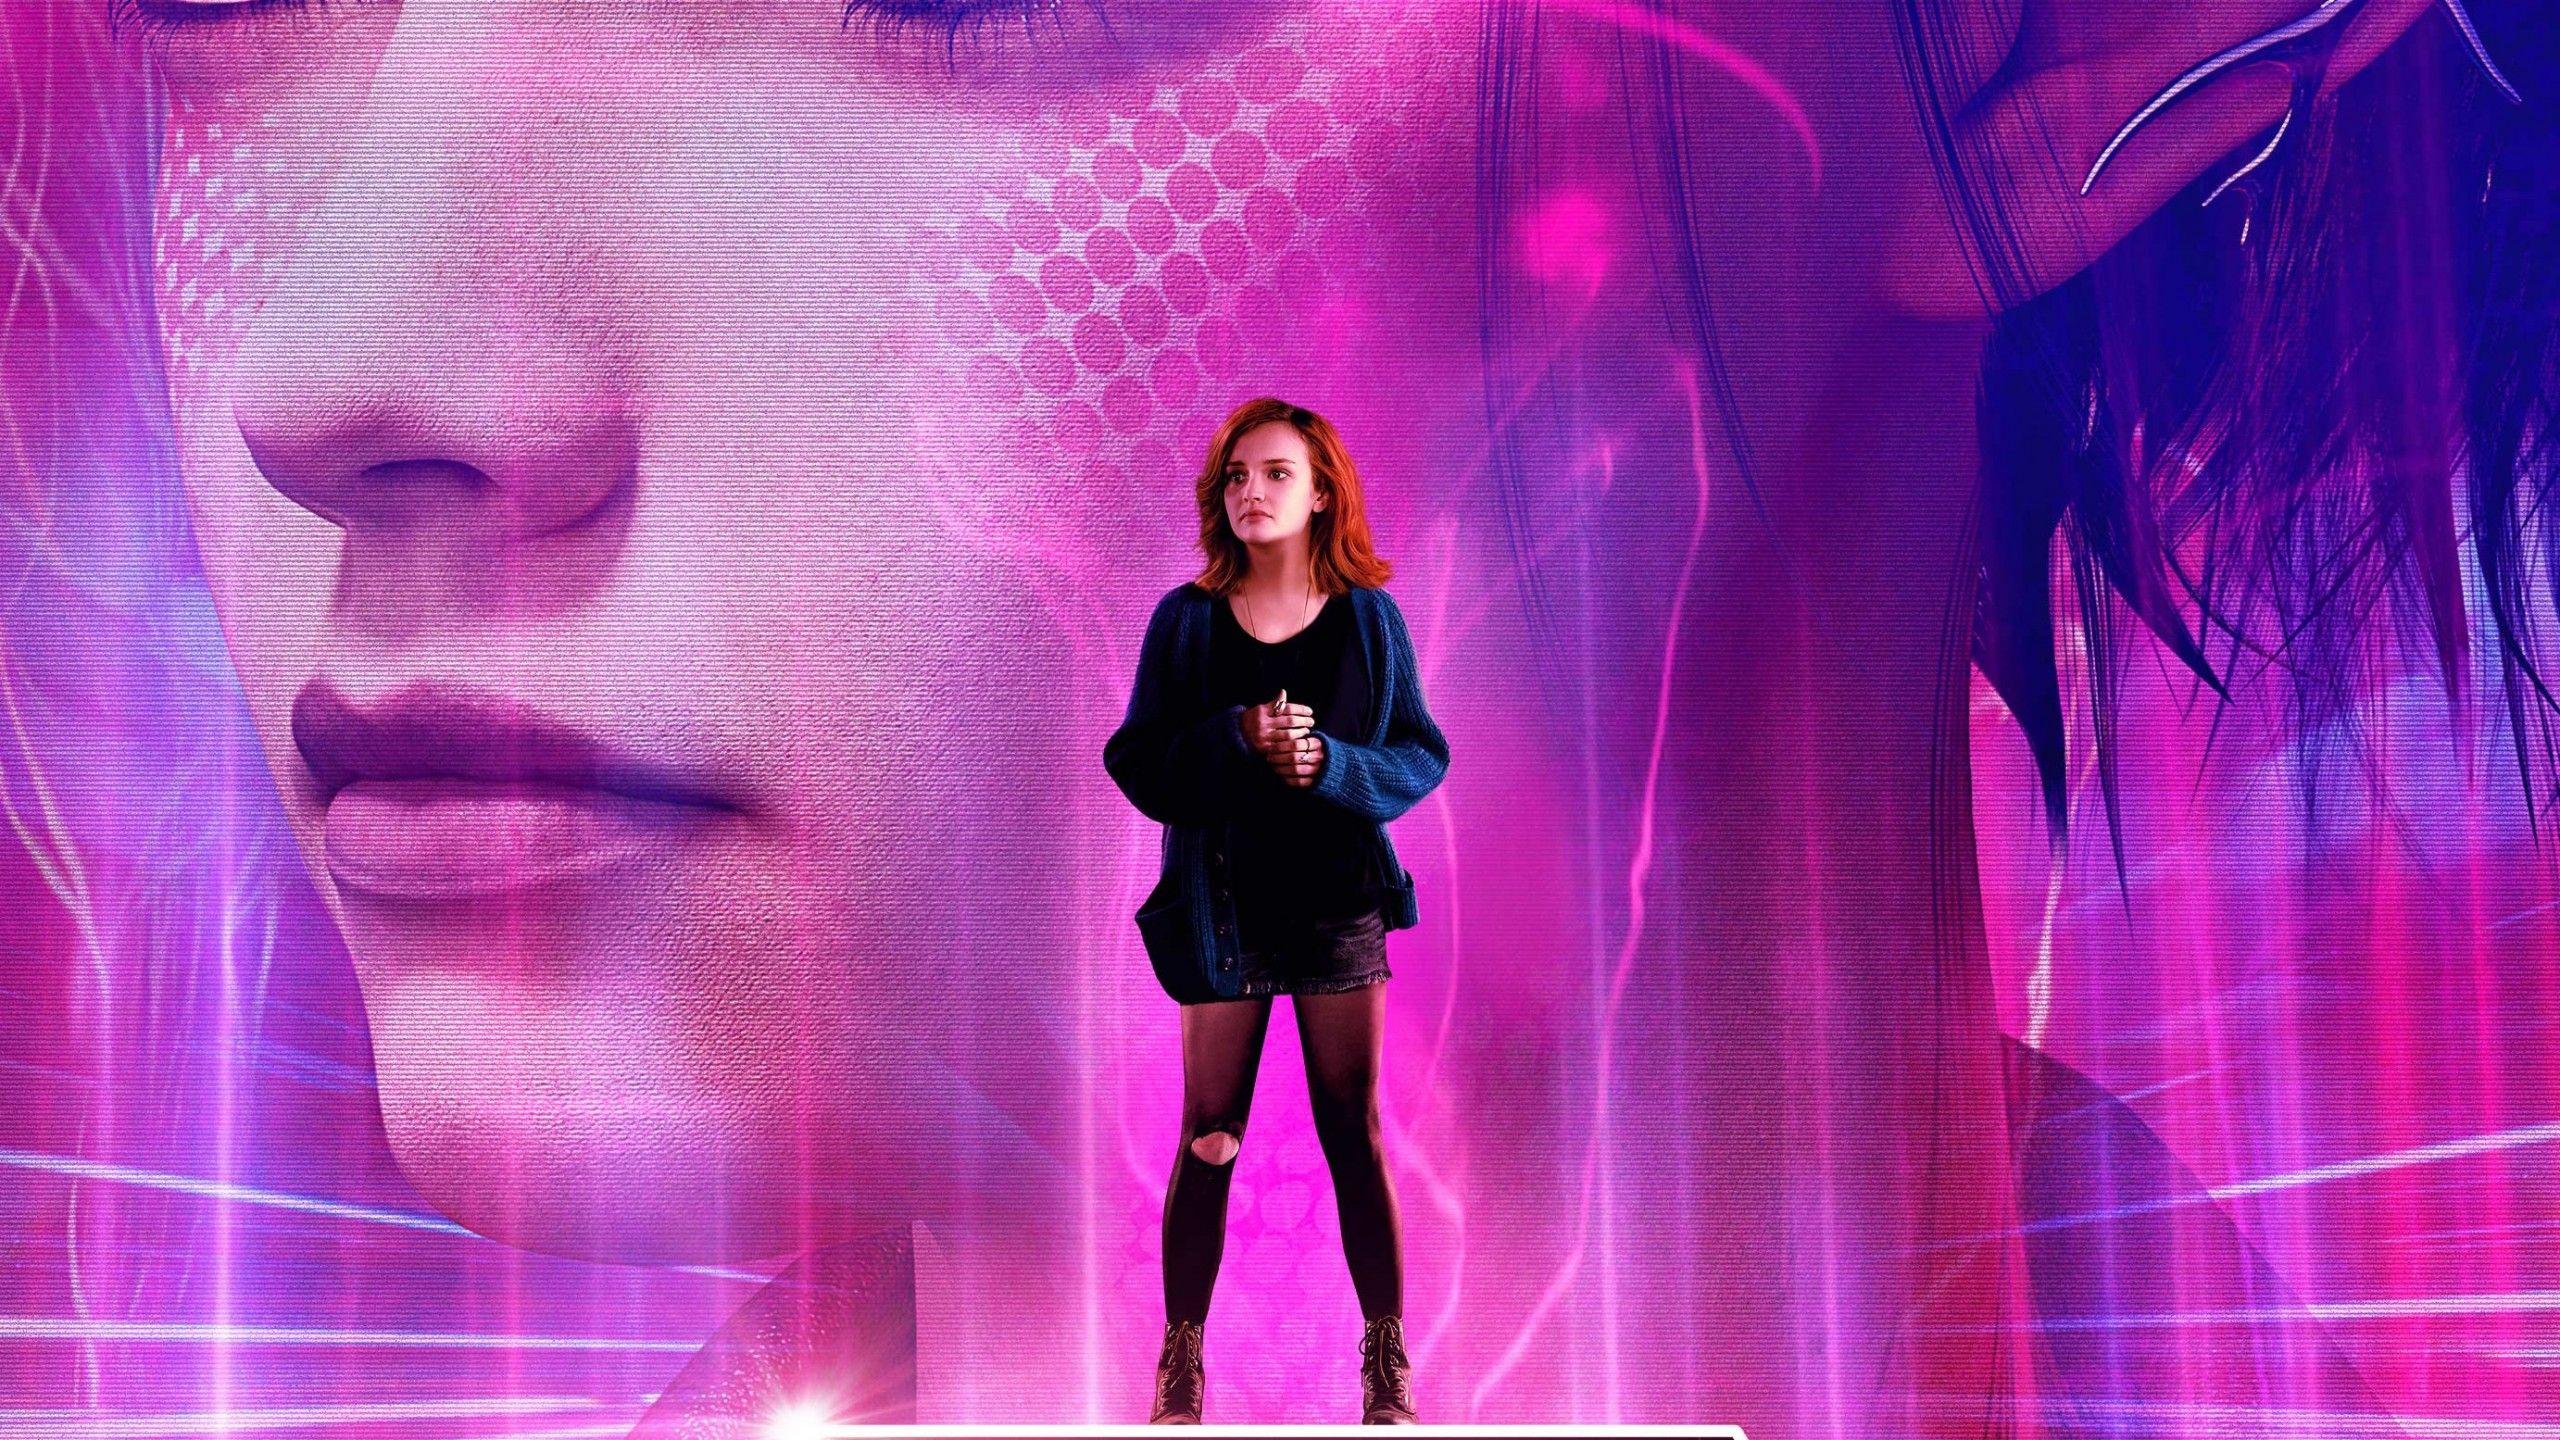 Download 2560x1440 Ready Player One, Olivia Cooke Wallpaper